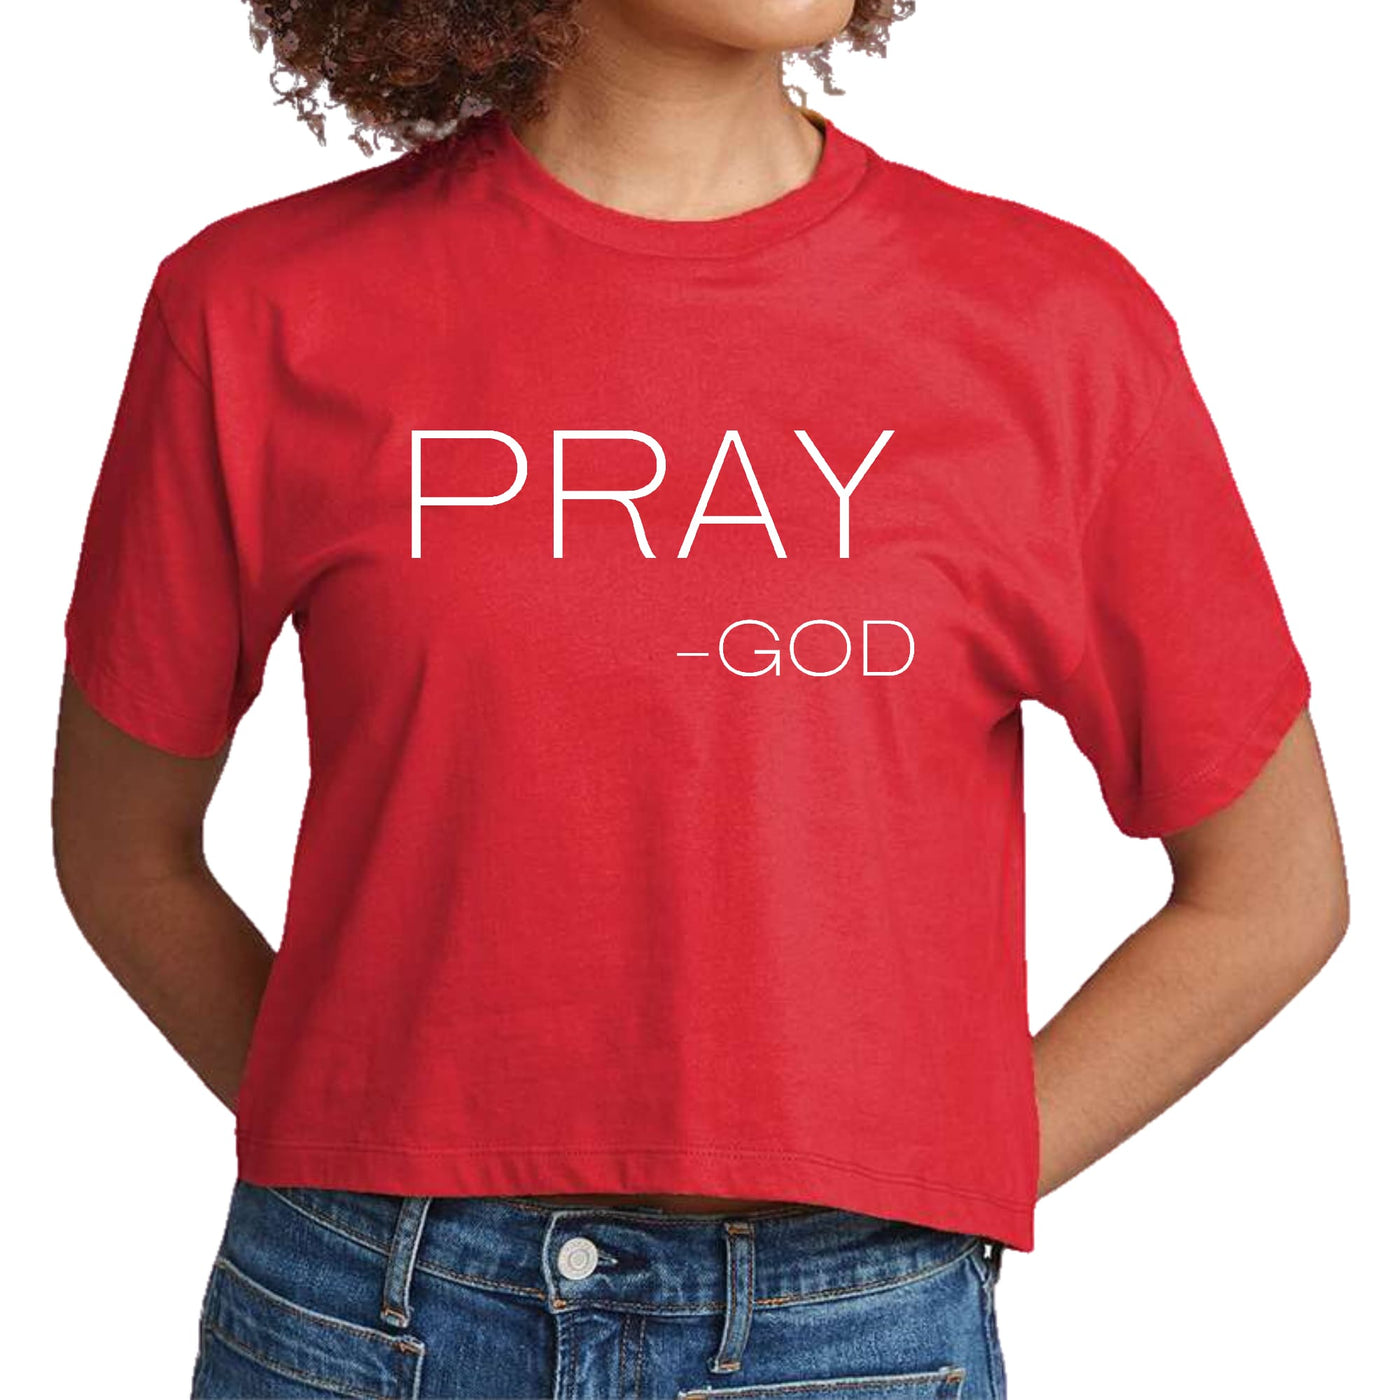 Womens Cropped Graphic T-shirt Say It Soul ’pray-god’ Statement - Womens